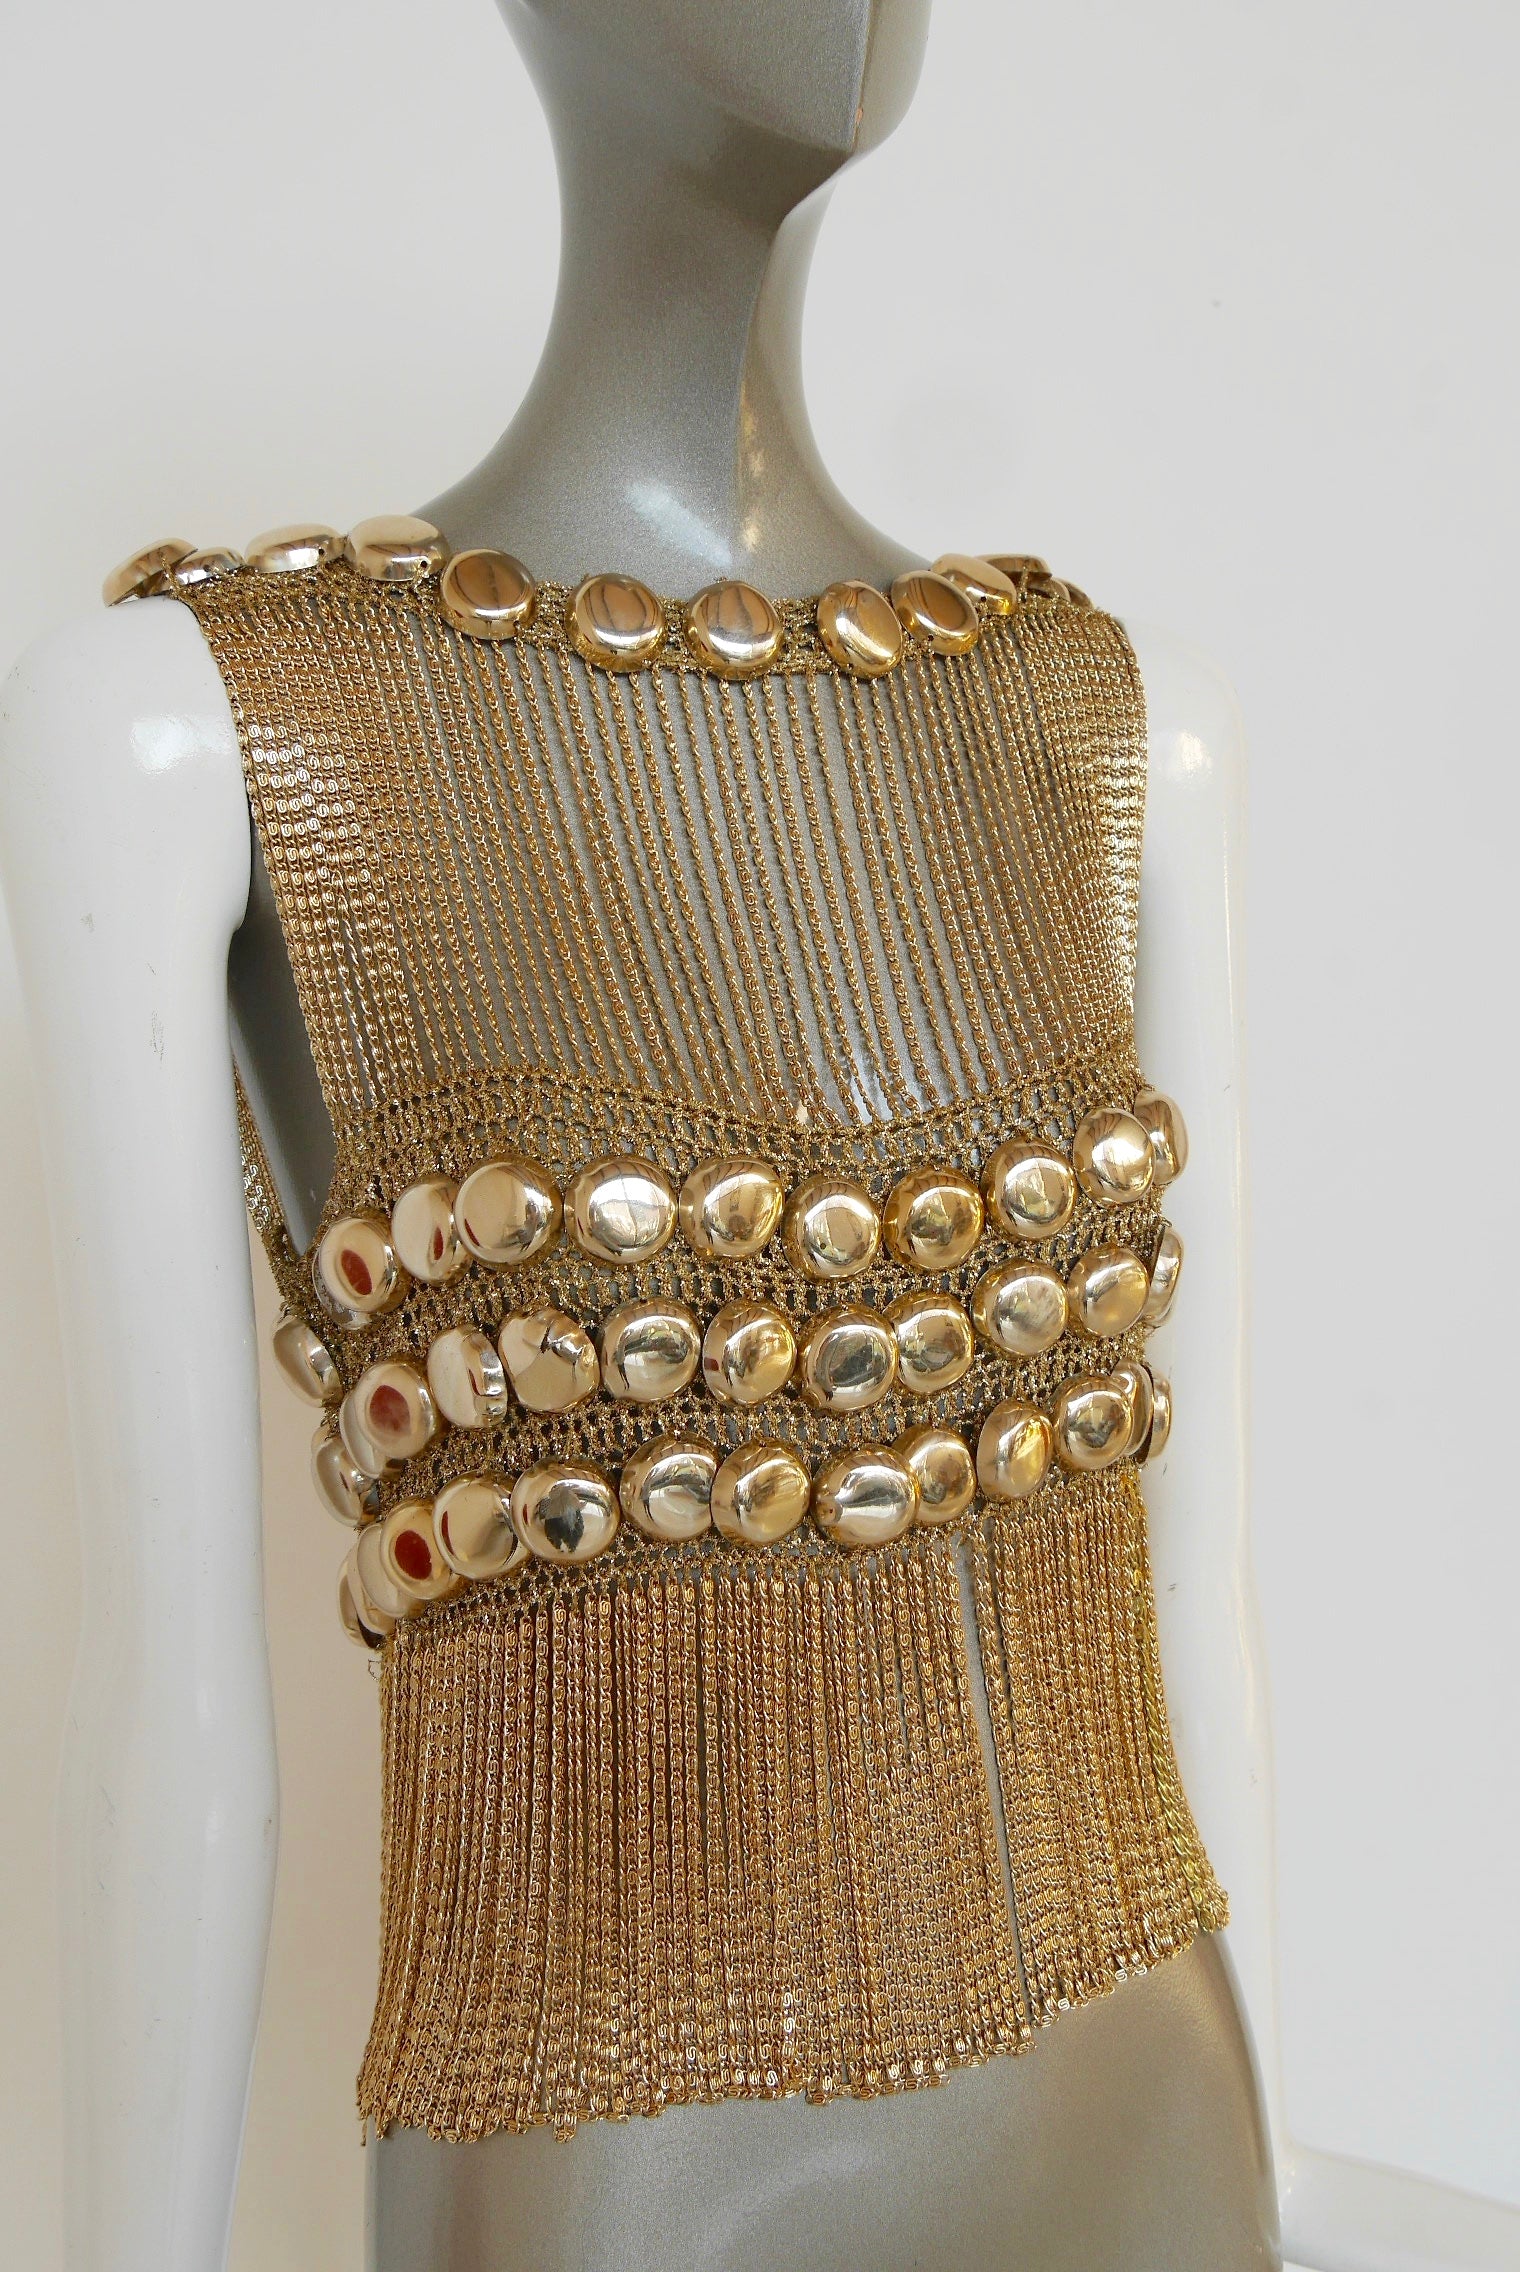 Loris Azzaro chained top rare design gold tone chains and lurex